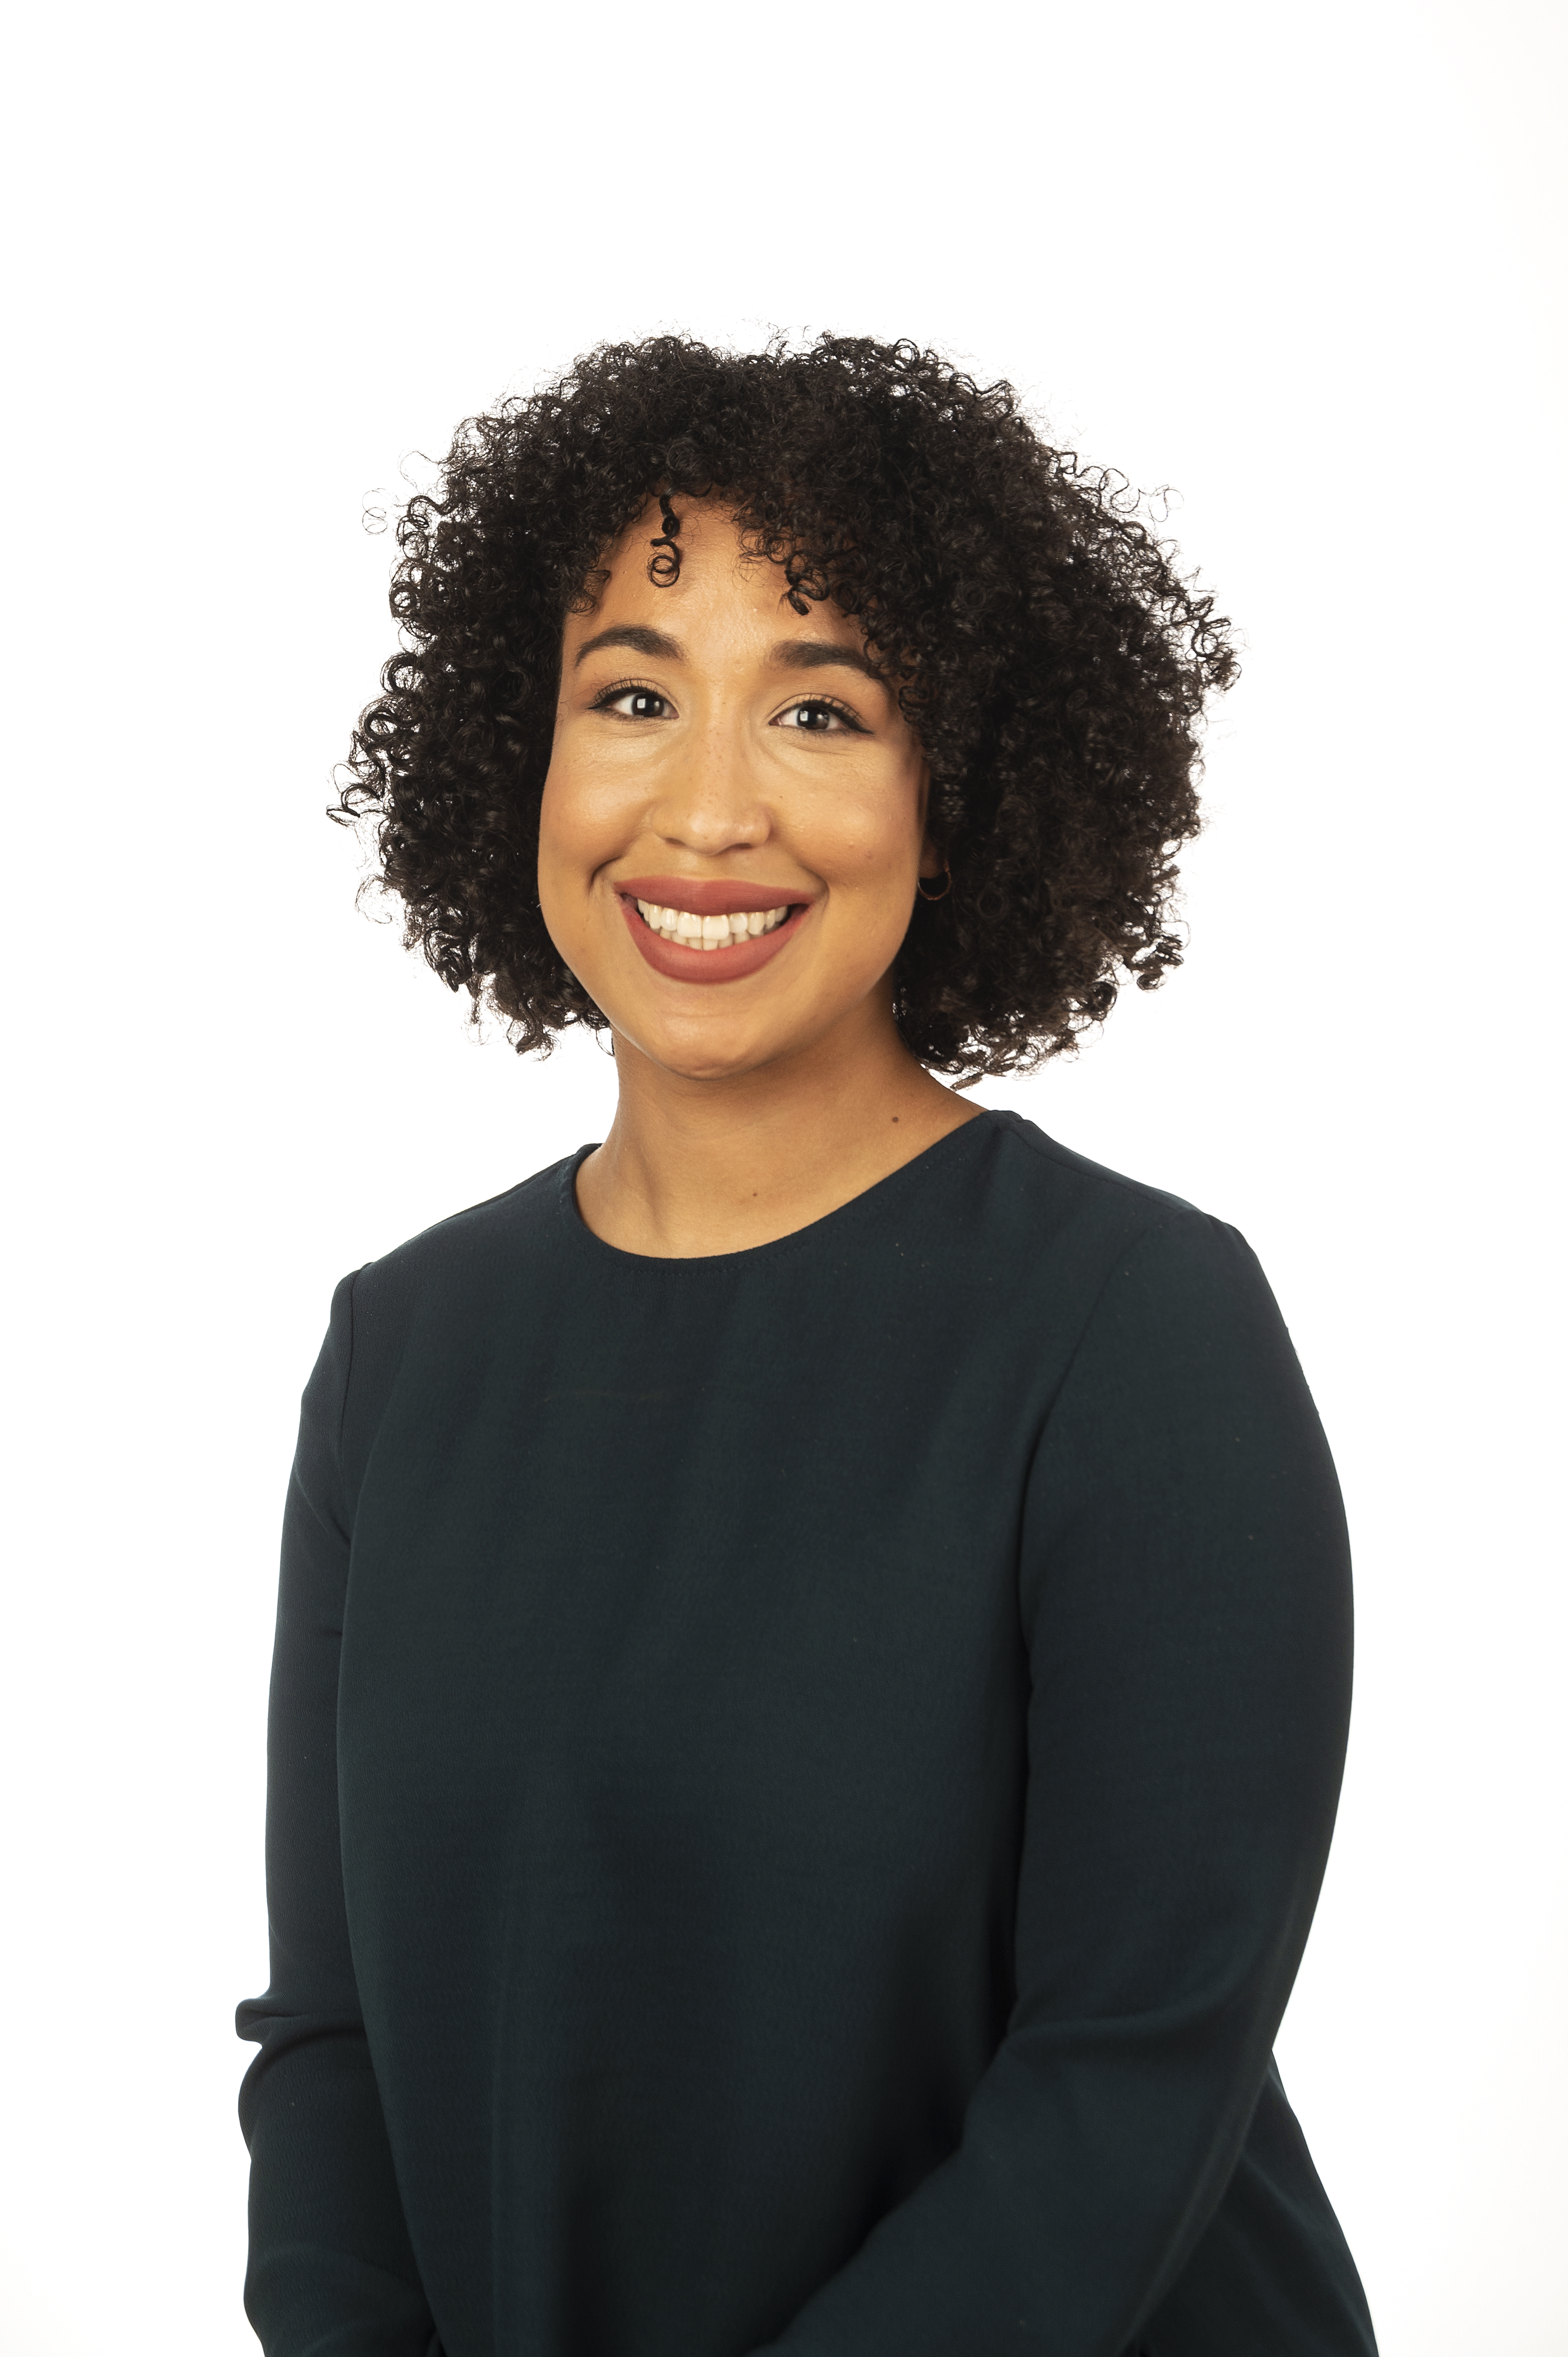 A brown woman looks at the camera in front of a white background. She has curly black hair and brown eyes and is wearing a long-sleeved black shirt.